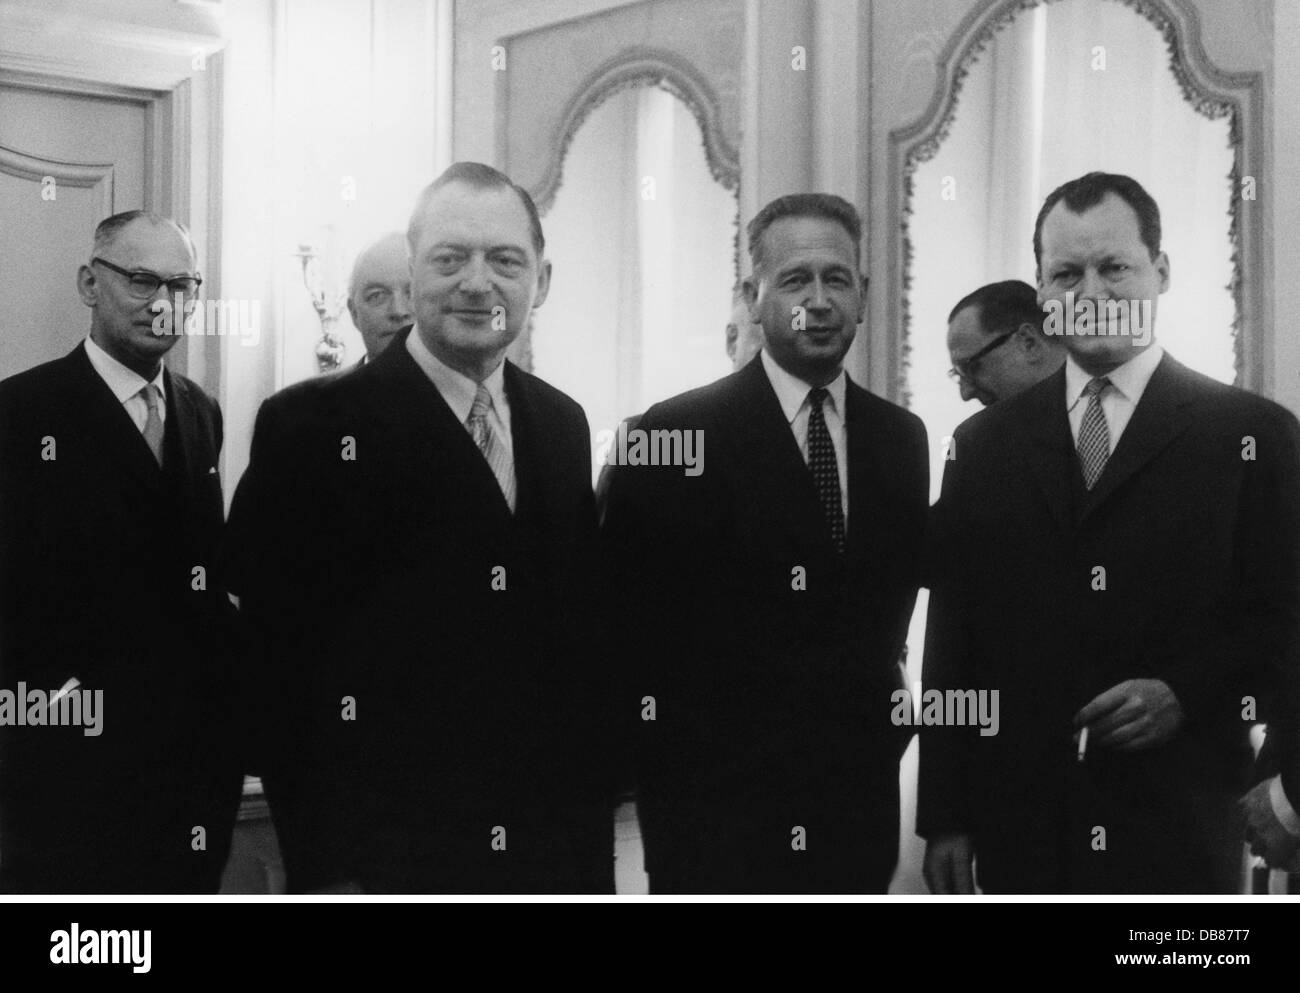 Brandt, Willy, 18.12.1913 - 8. 10.1992, German politician (SPD), Governing Mayor of Berlin 3.10.1957 - 1.12.1966, visit to New York, reception in the hotel Waldorf Astoria, with secretary-general of the United Nations Dag Hammarskjold and the German observer at the UNO Carl Werner Dankwort, 11.2.1959, Stock Photo